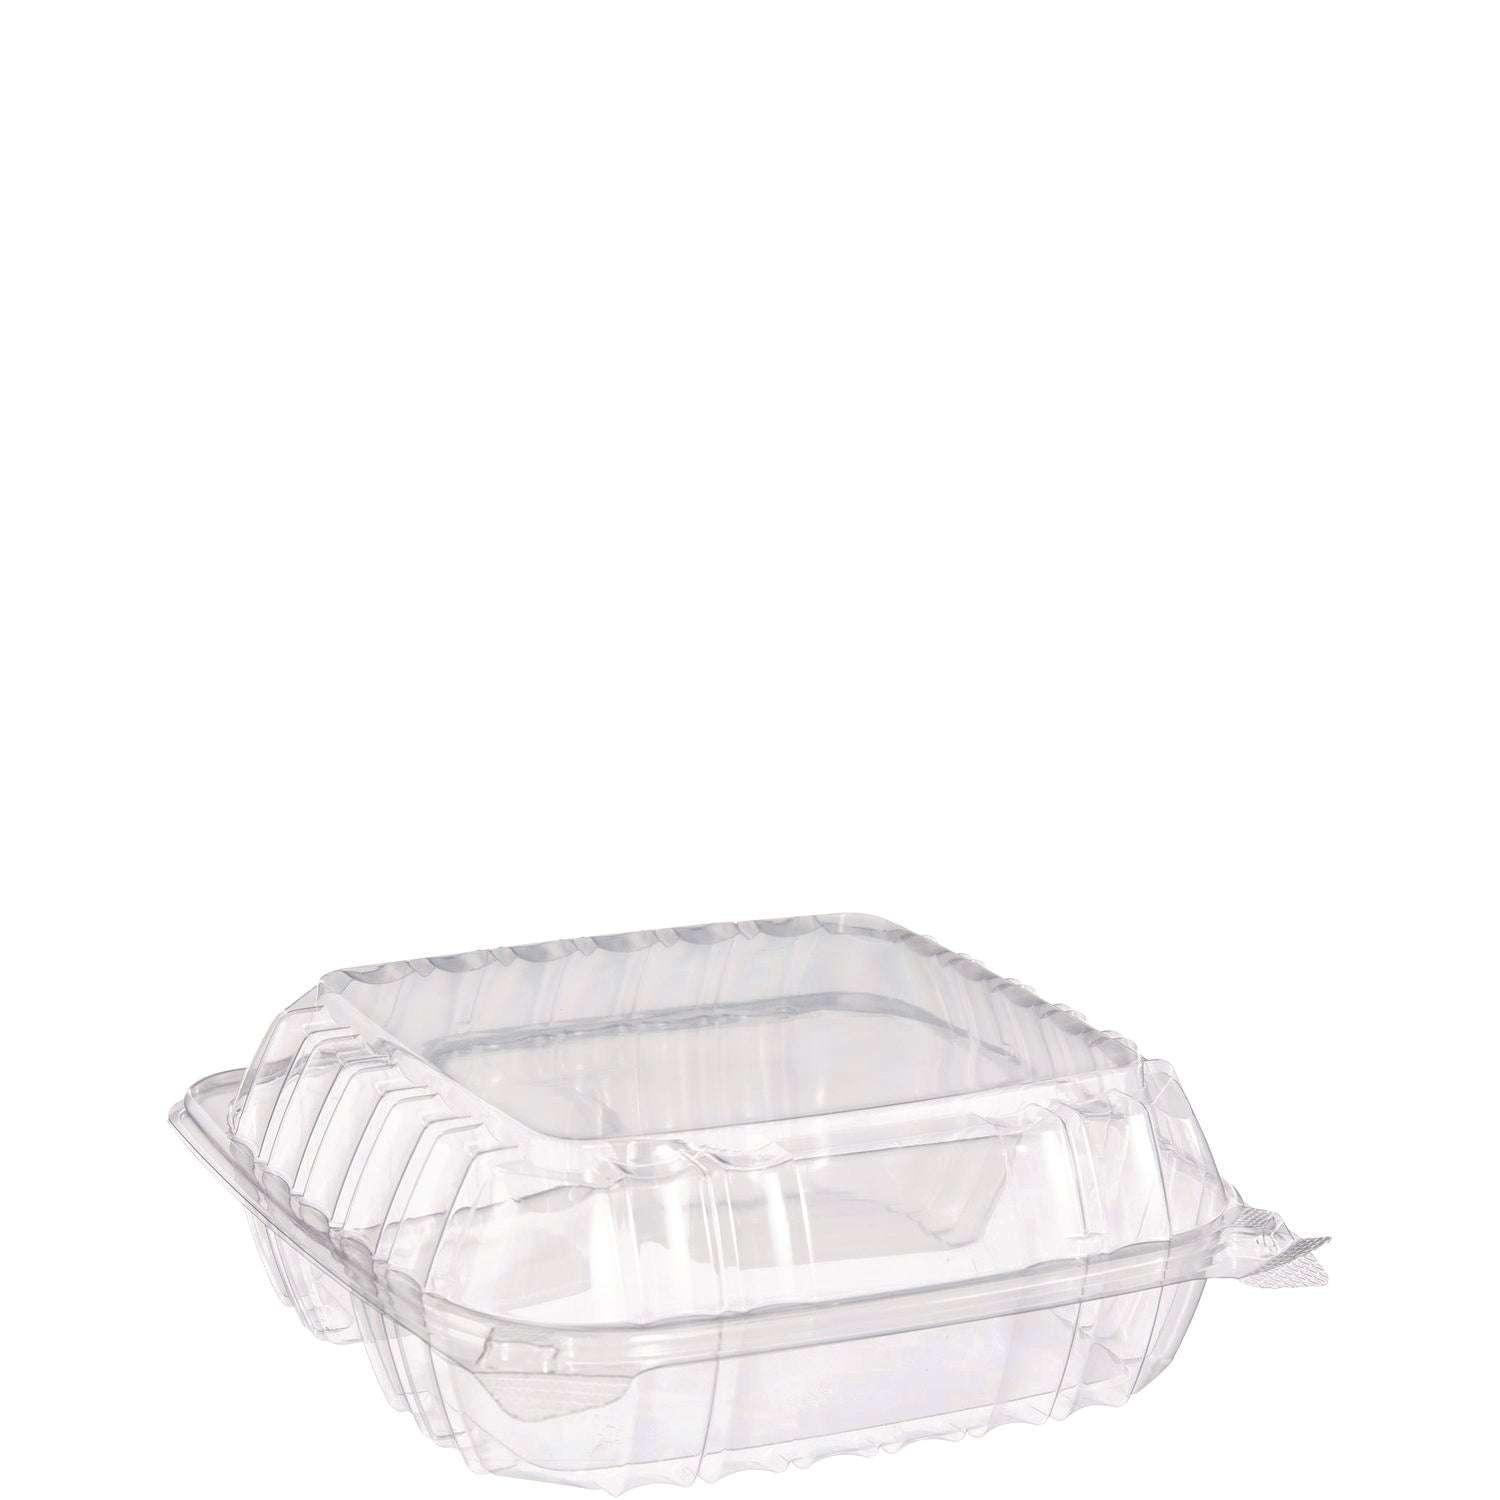 clearseal-hinged-lid-plastic-containers-825-x-825-x-3-clear-plastic-125-pack-2-packs-carton_dccc90pst3 - 1